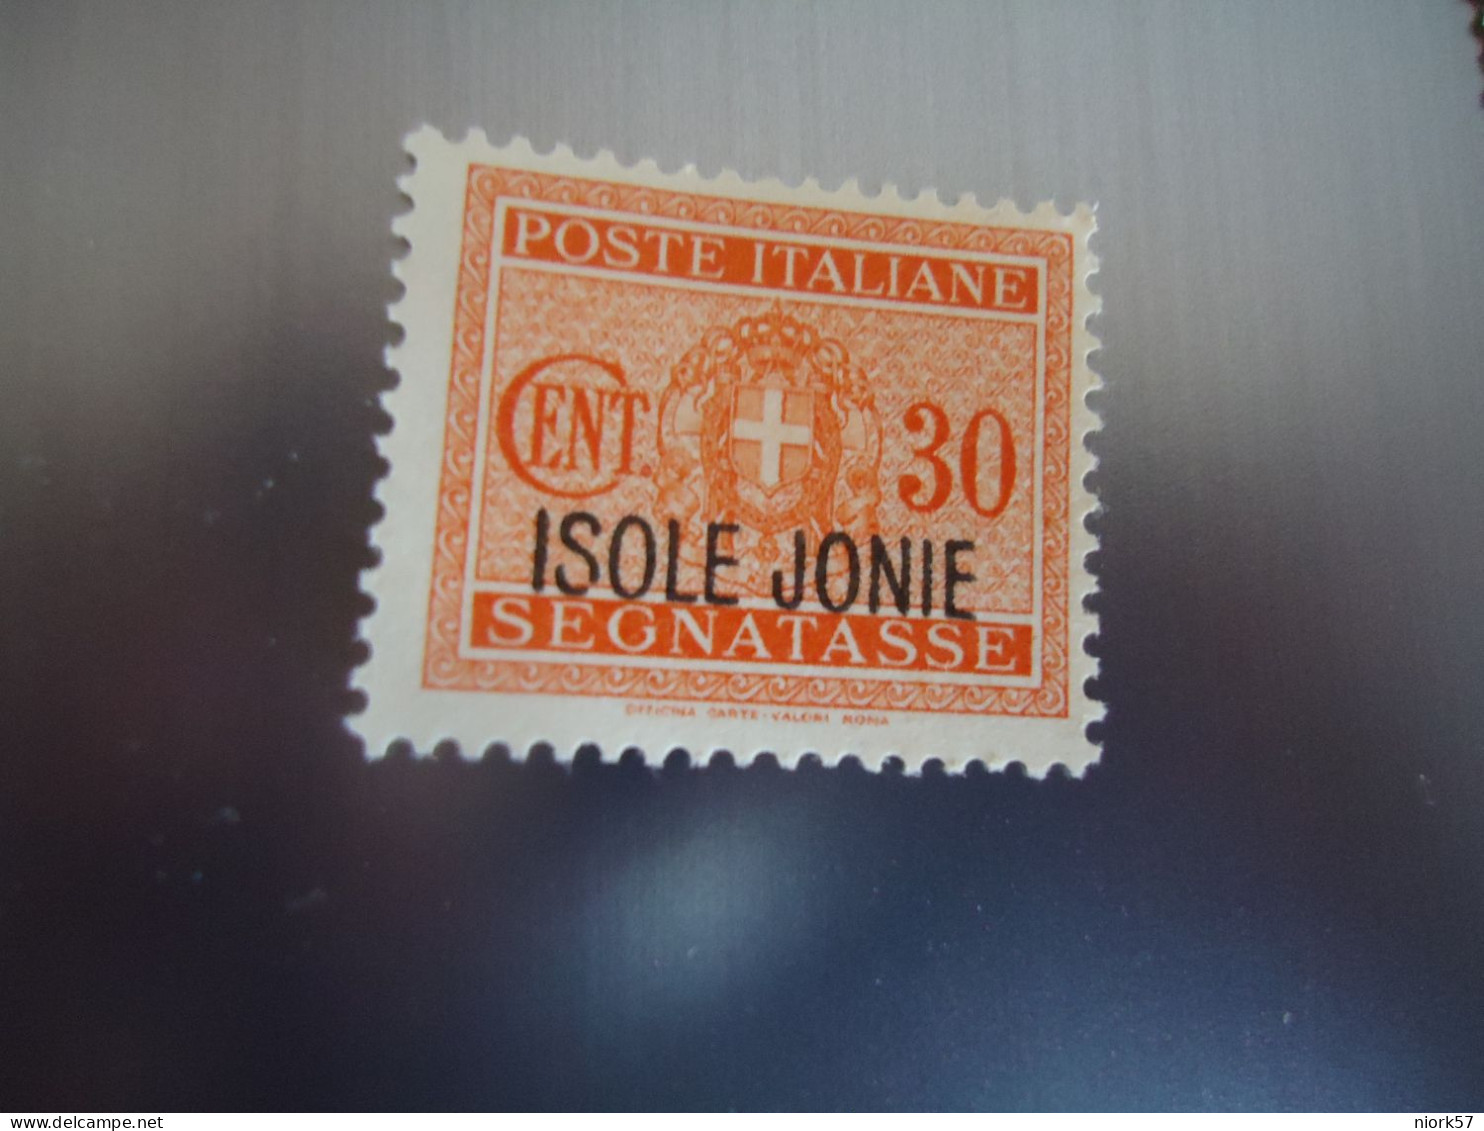 IONIAN ISLANDS GREECE  MNH  ITALY STAMPS OVEPRPIN ISOLE JONIE - Isole Ioniche